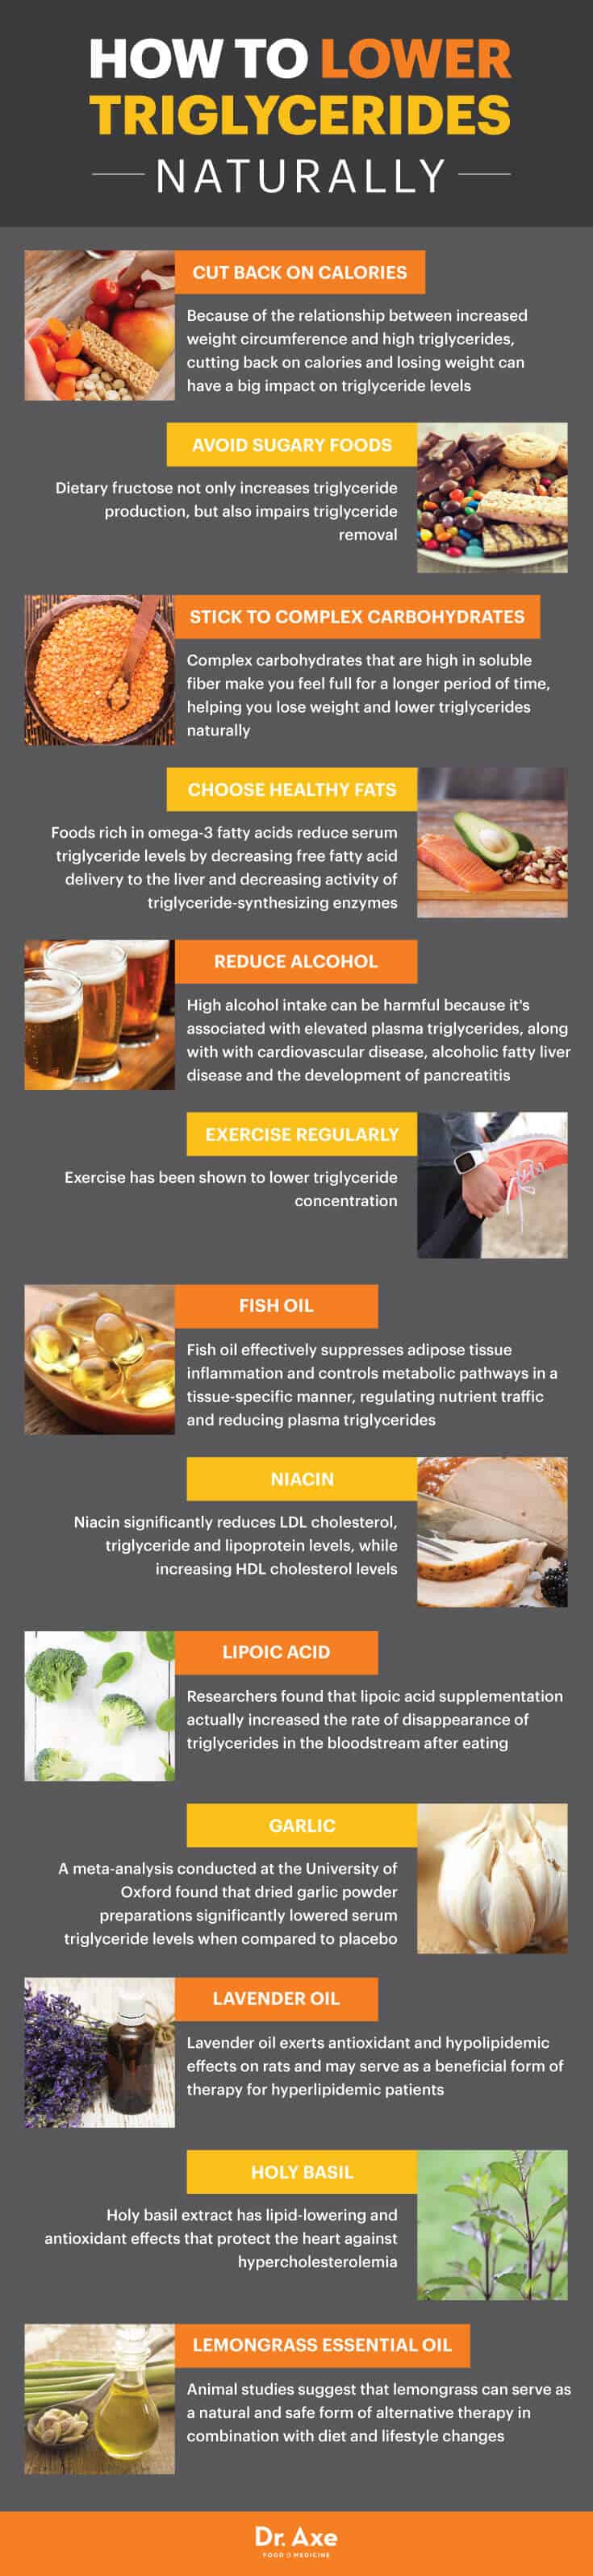 How to lower high triglycerides naturally - Dr. Axe